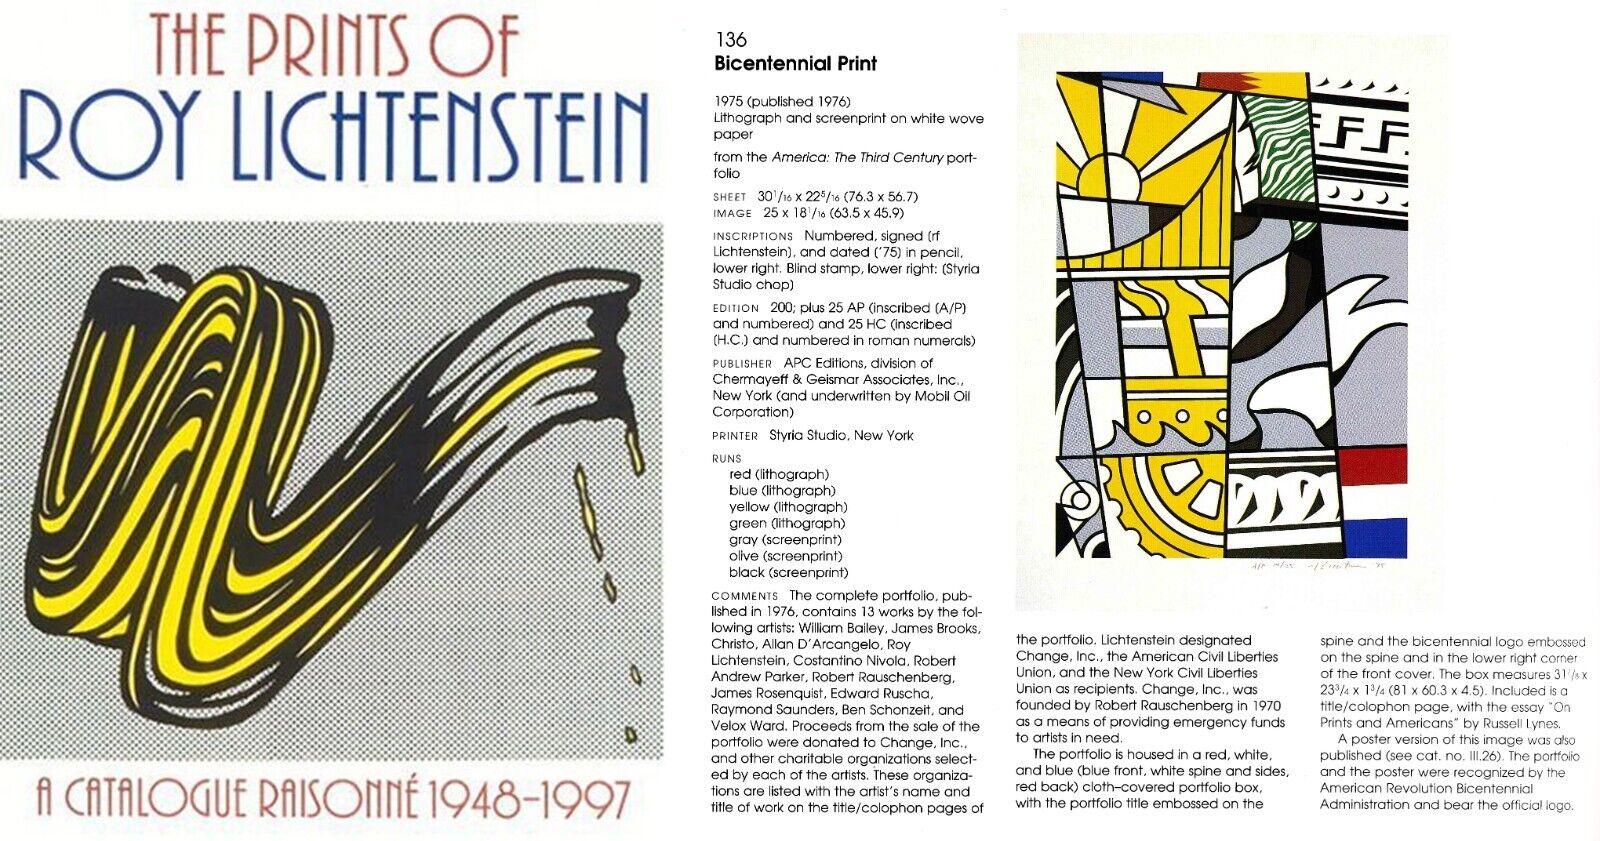 Corlett Catalogue Raisonne Documentation Page 140, Roy Lichtenstein Bicentennial Print (Corlett 136), 1975, 7 color lithograph and silkscreen in red, blue, yellow, green, gray, olive and black on white wove paper